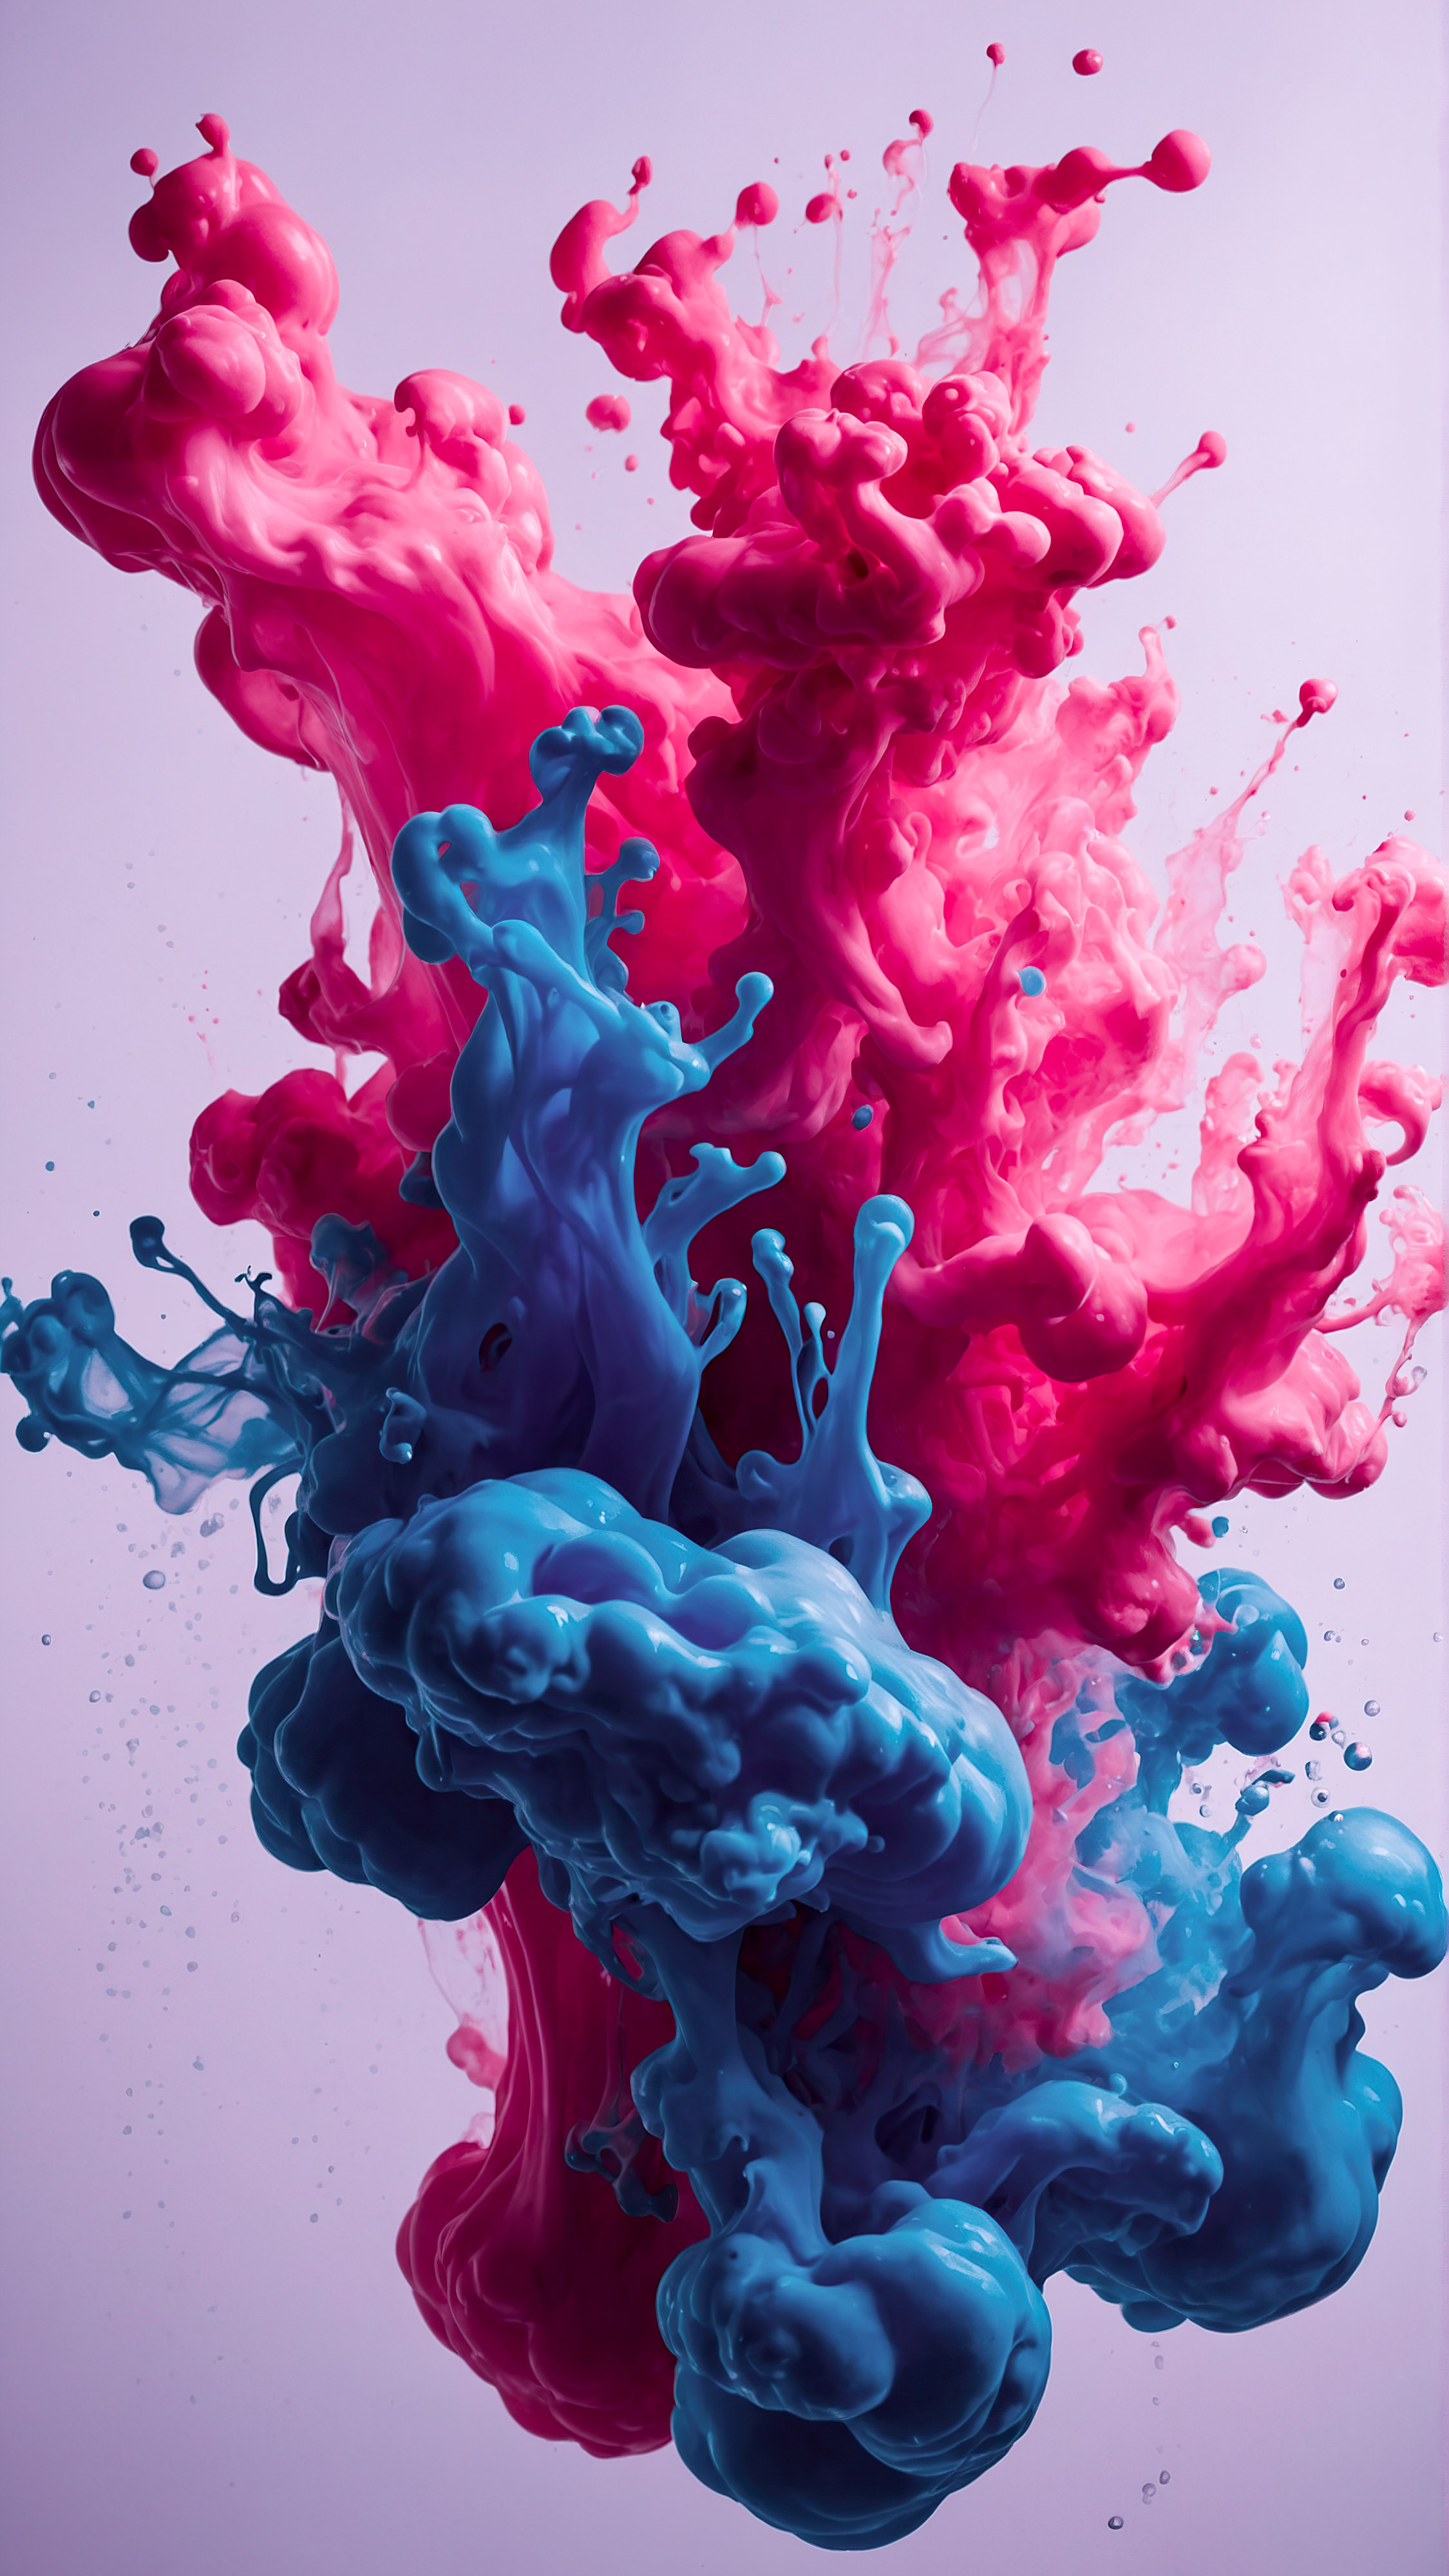 Get mesmerized with a dynamic and fluid mix of pink and blue inks dispersing in water, through our unique cute lock screen wallpaper for your iPhone.